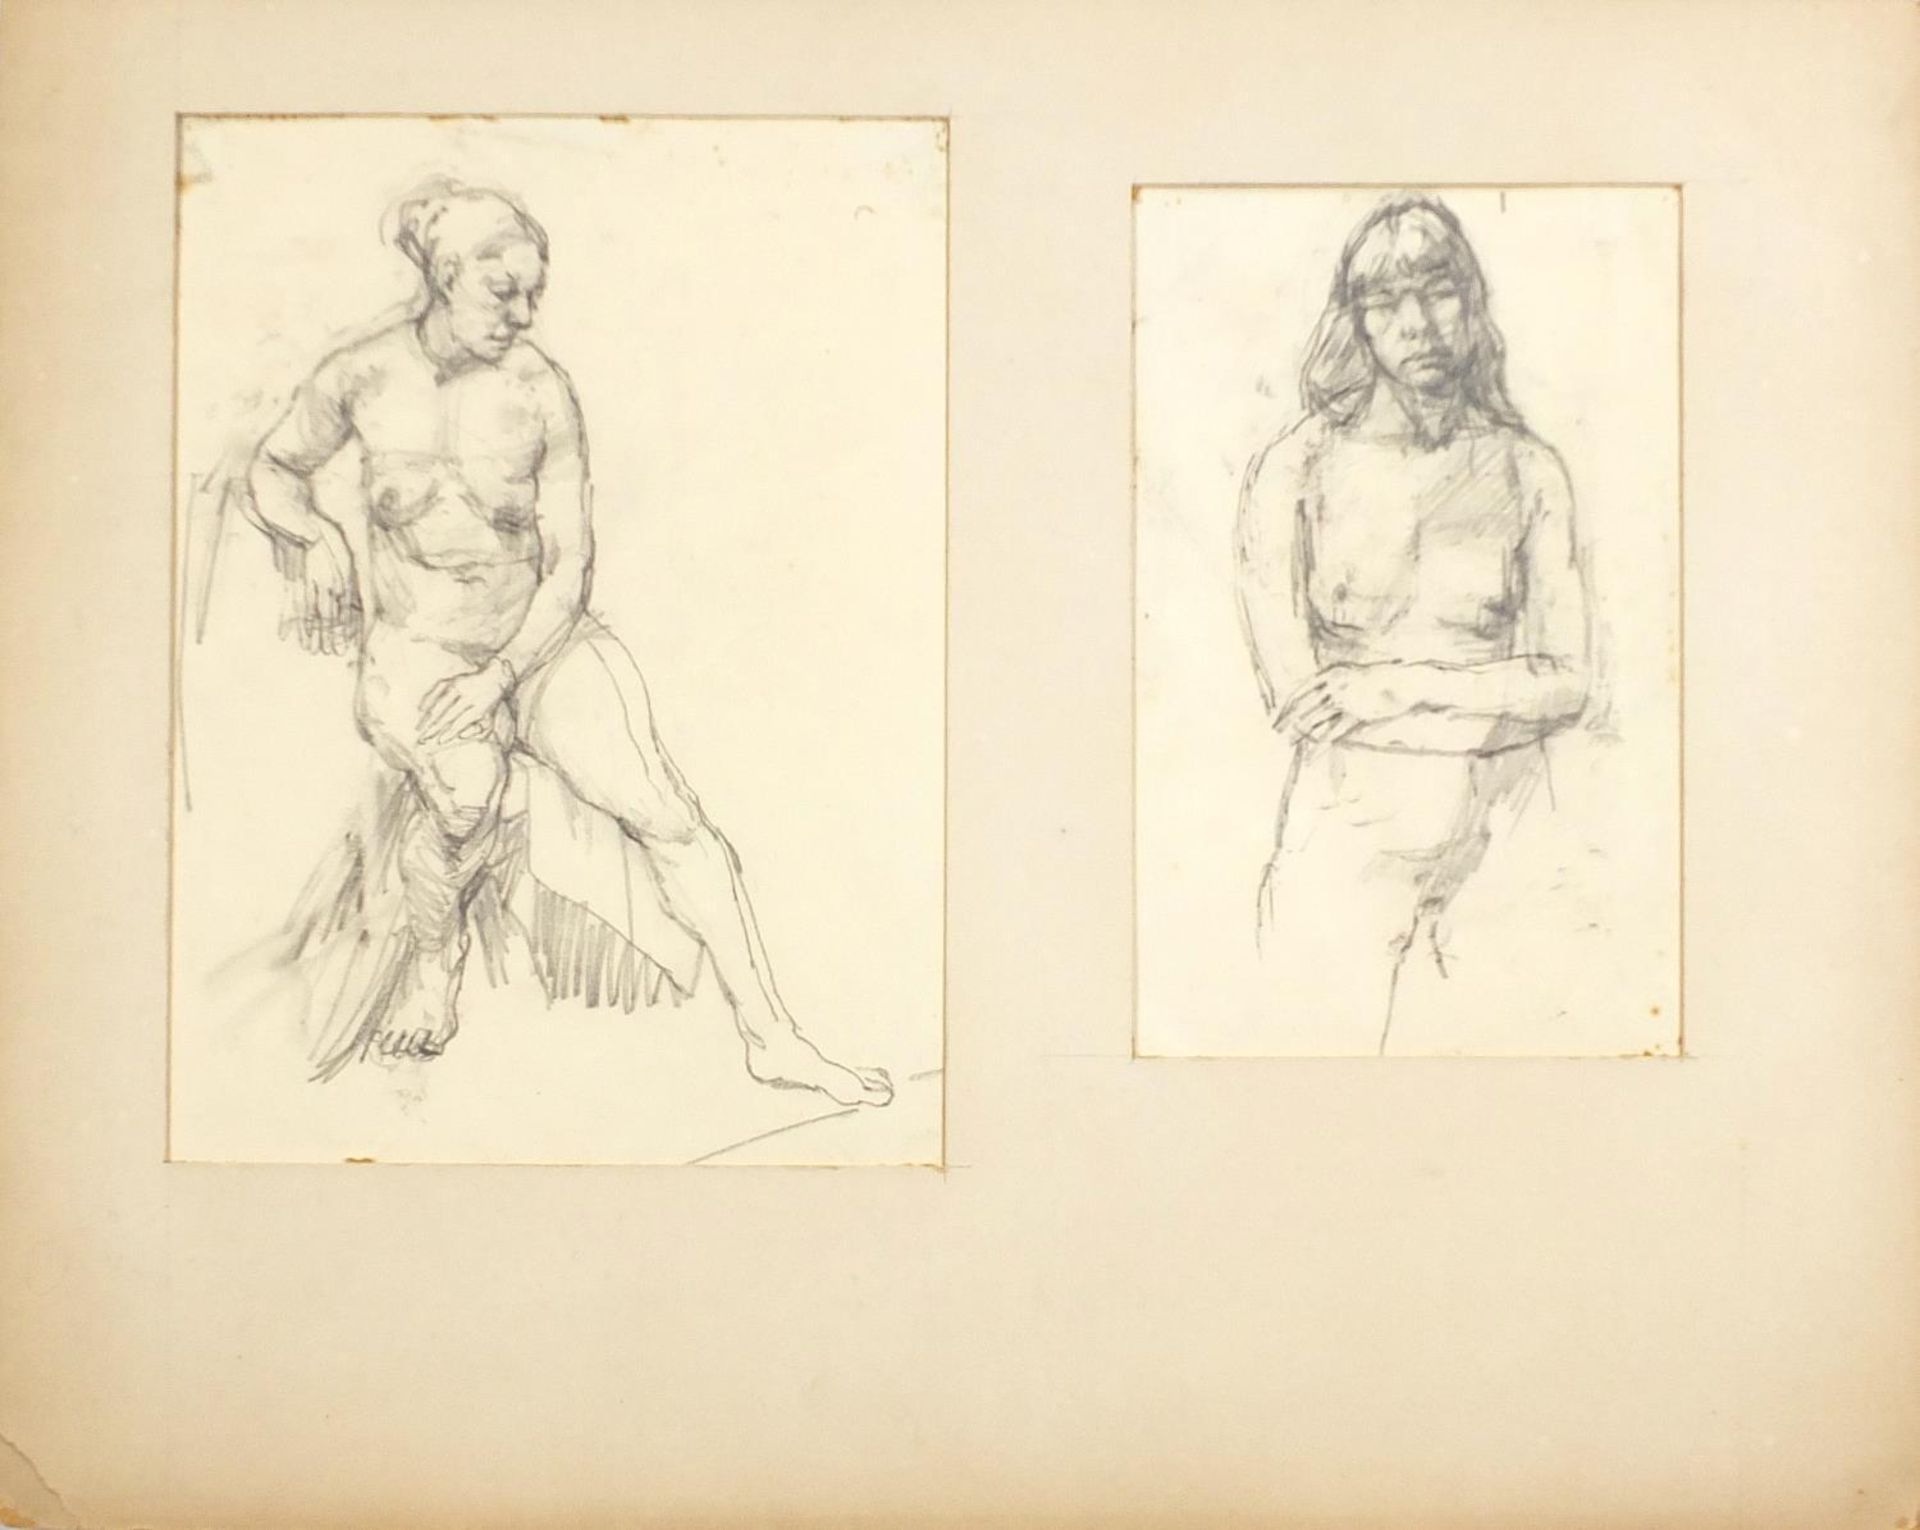 Nude figural studies, four pencil drawings on paper, mounted, unframed, the largest 29cm x 21.5cm - Image 2 of 5